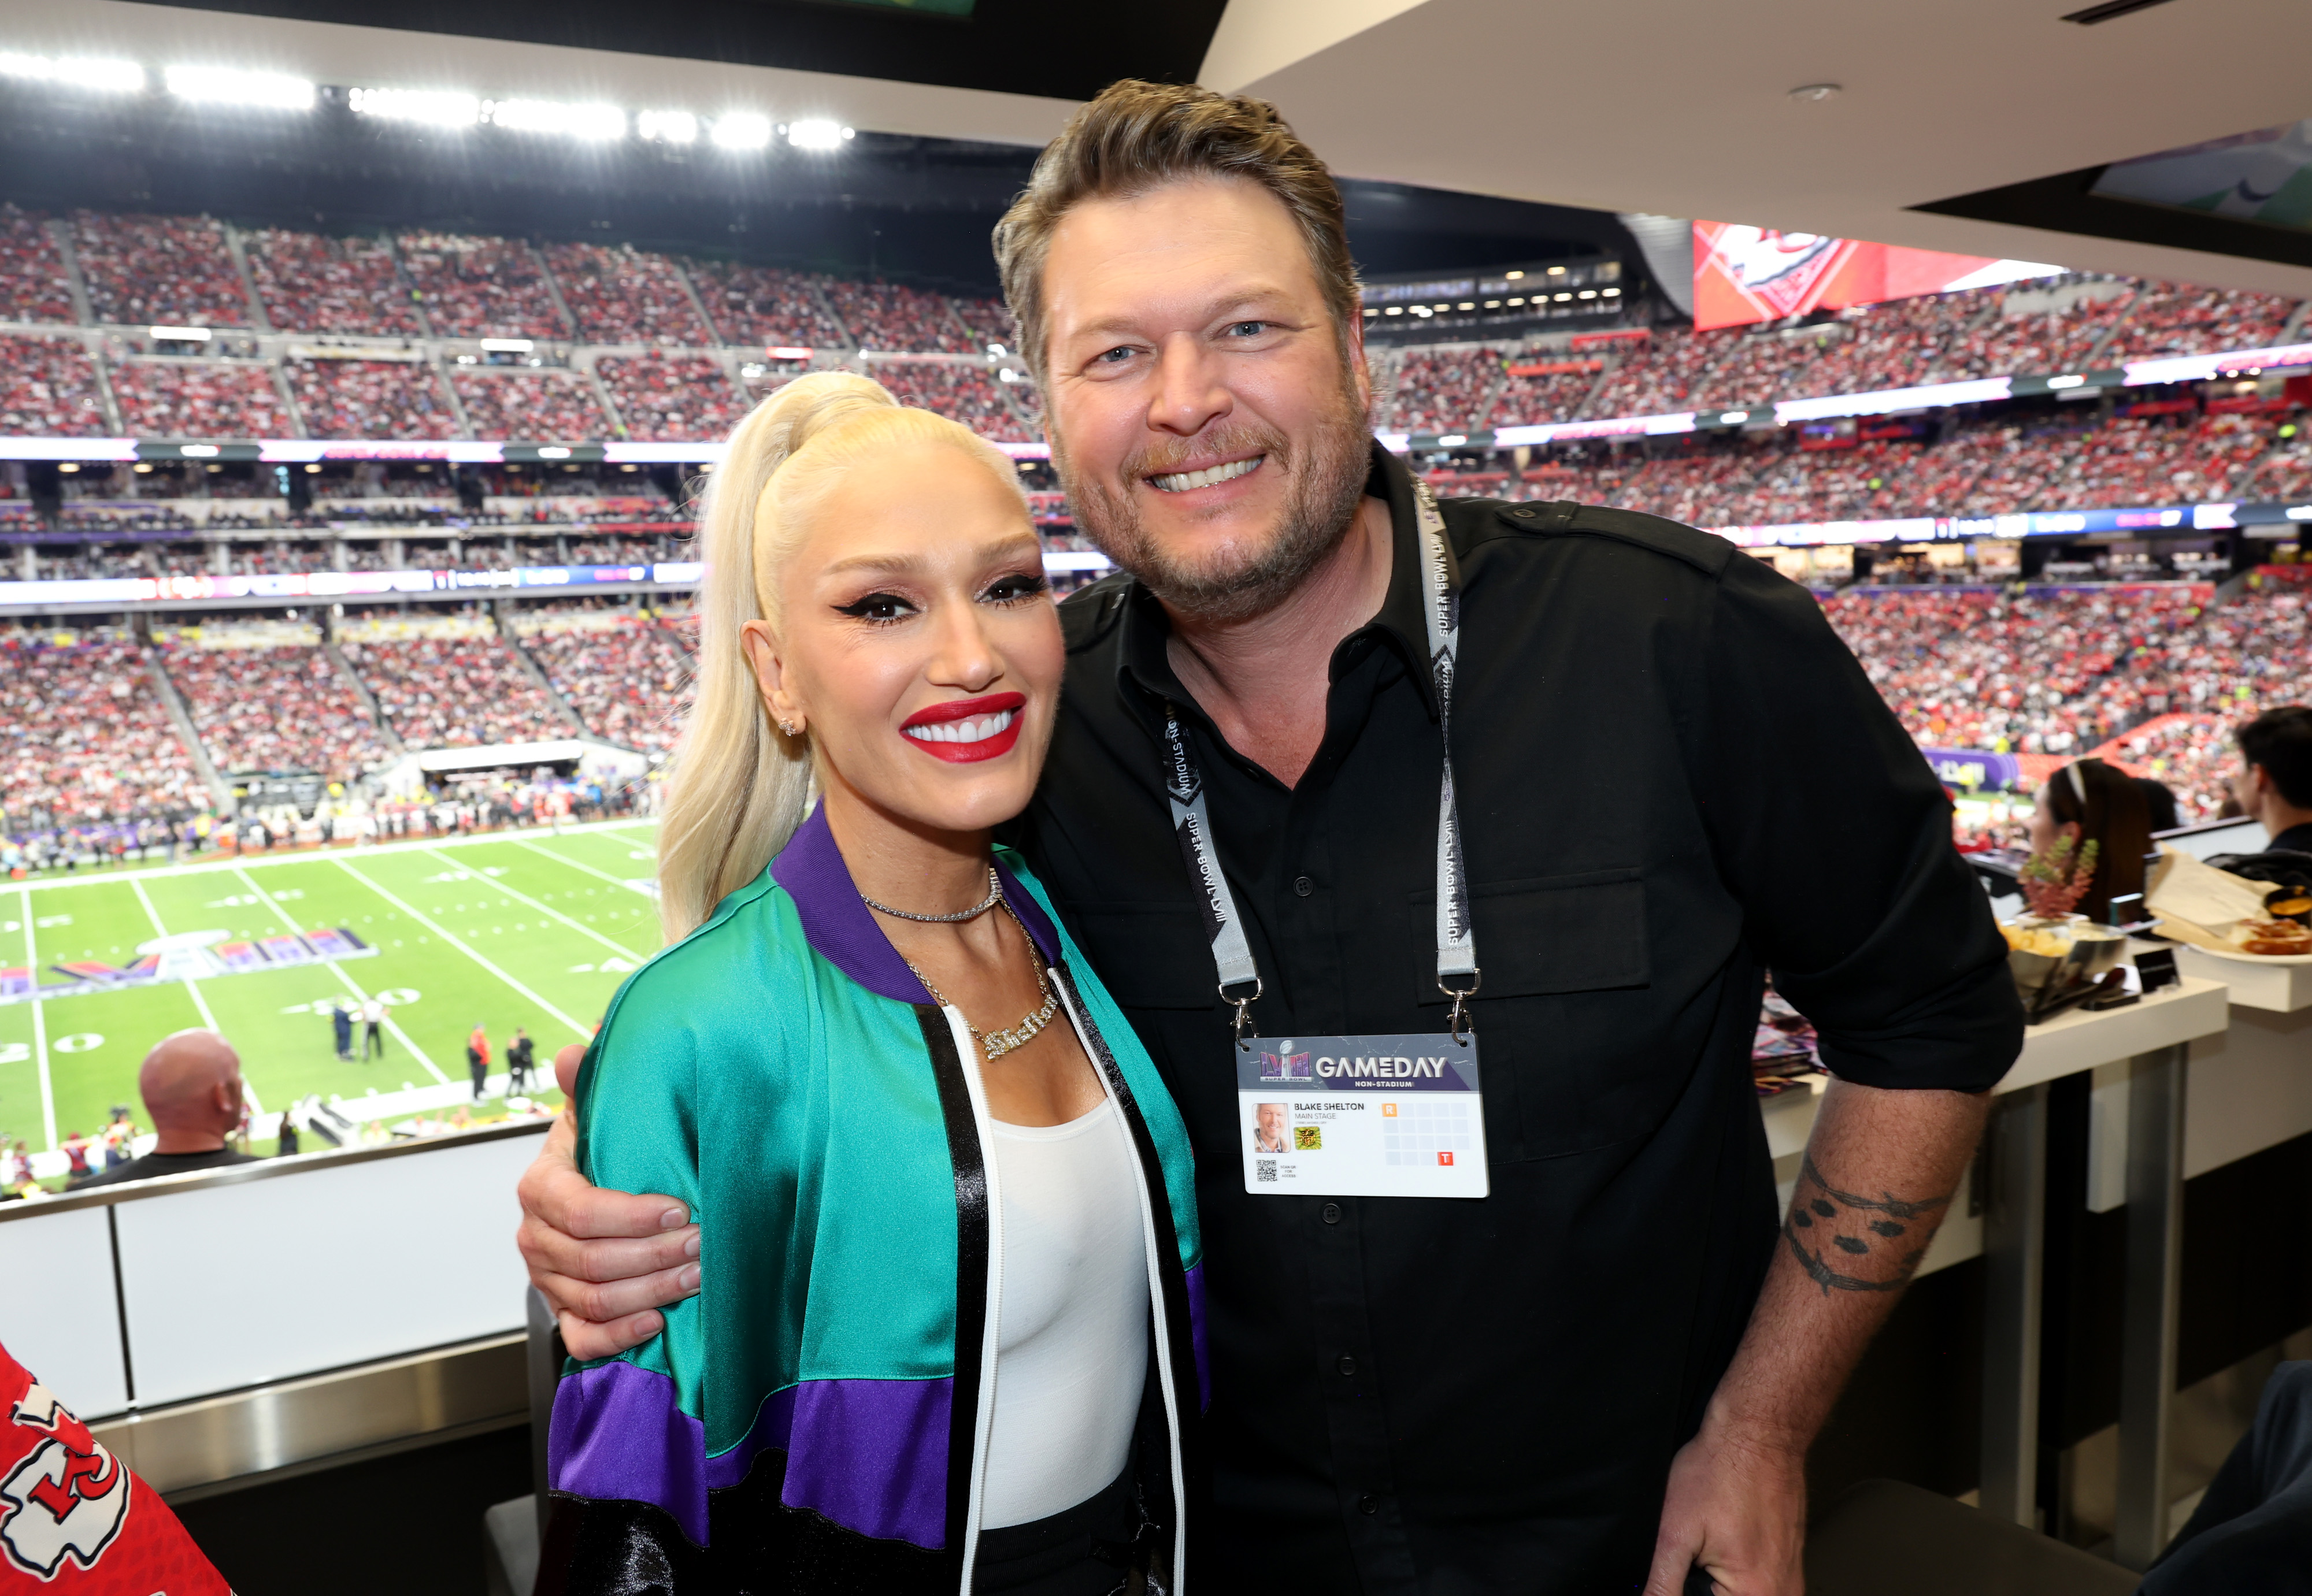 Rumors have been circulating that Gwen and Blake were having marriage issues